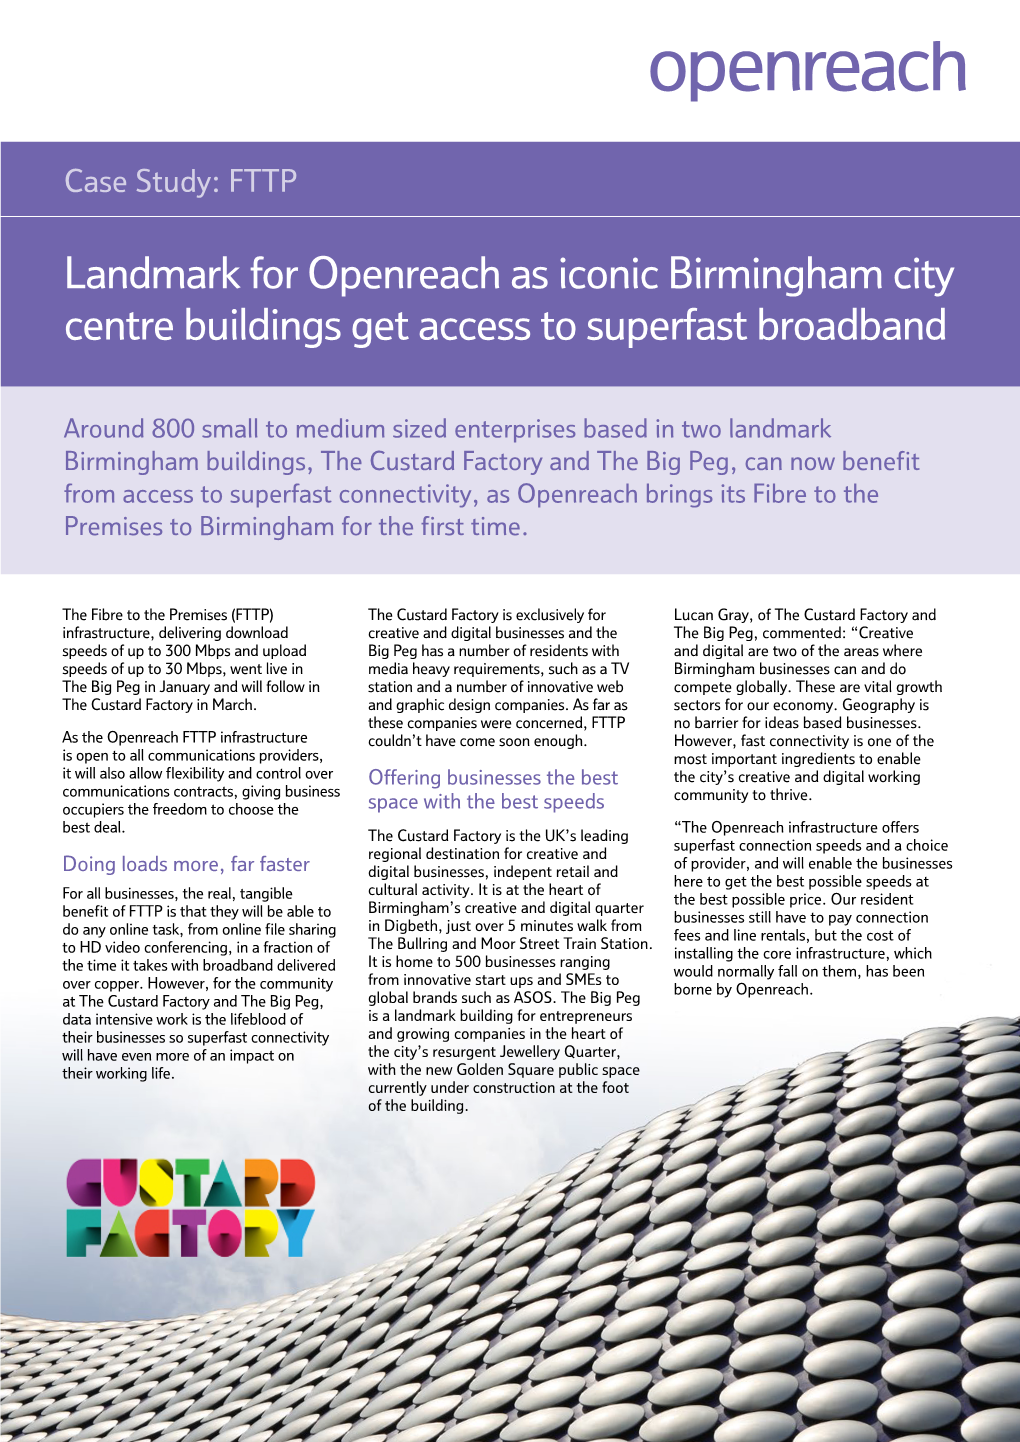 Landmark for Openreach As Iconic Birmingham City Centre Buildings Get Access to Superfast Broadband